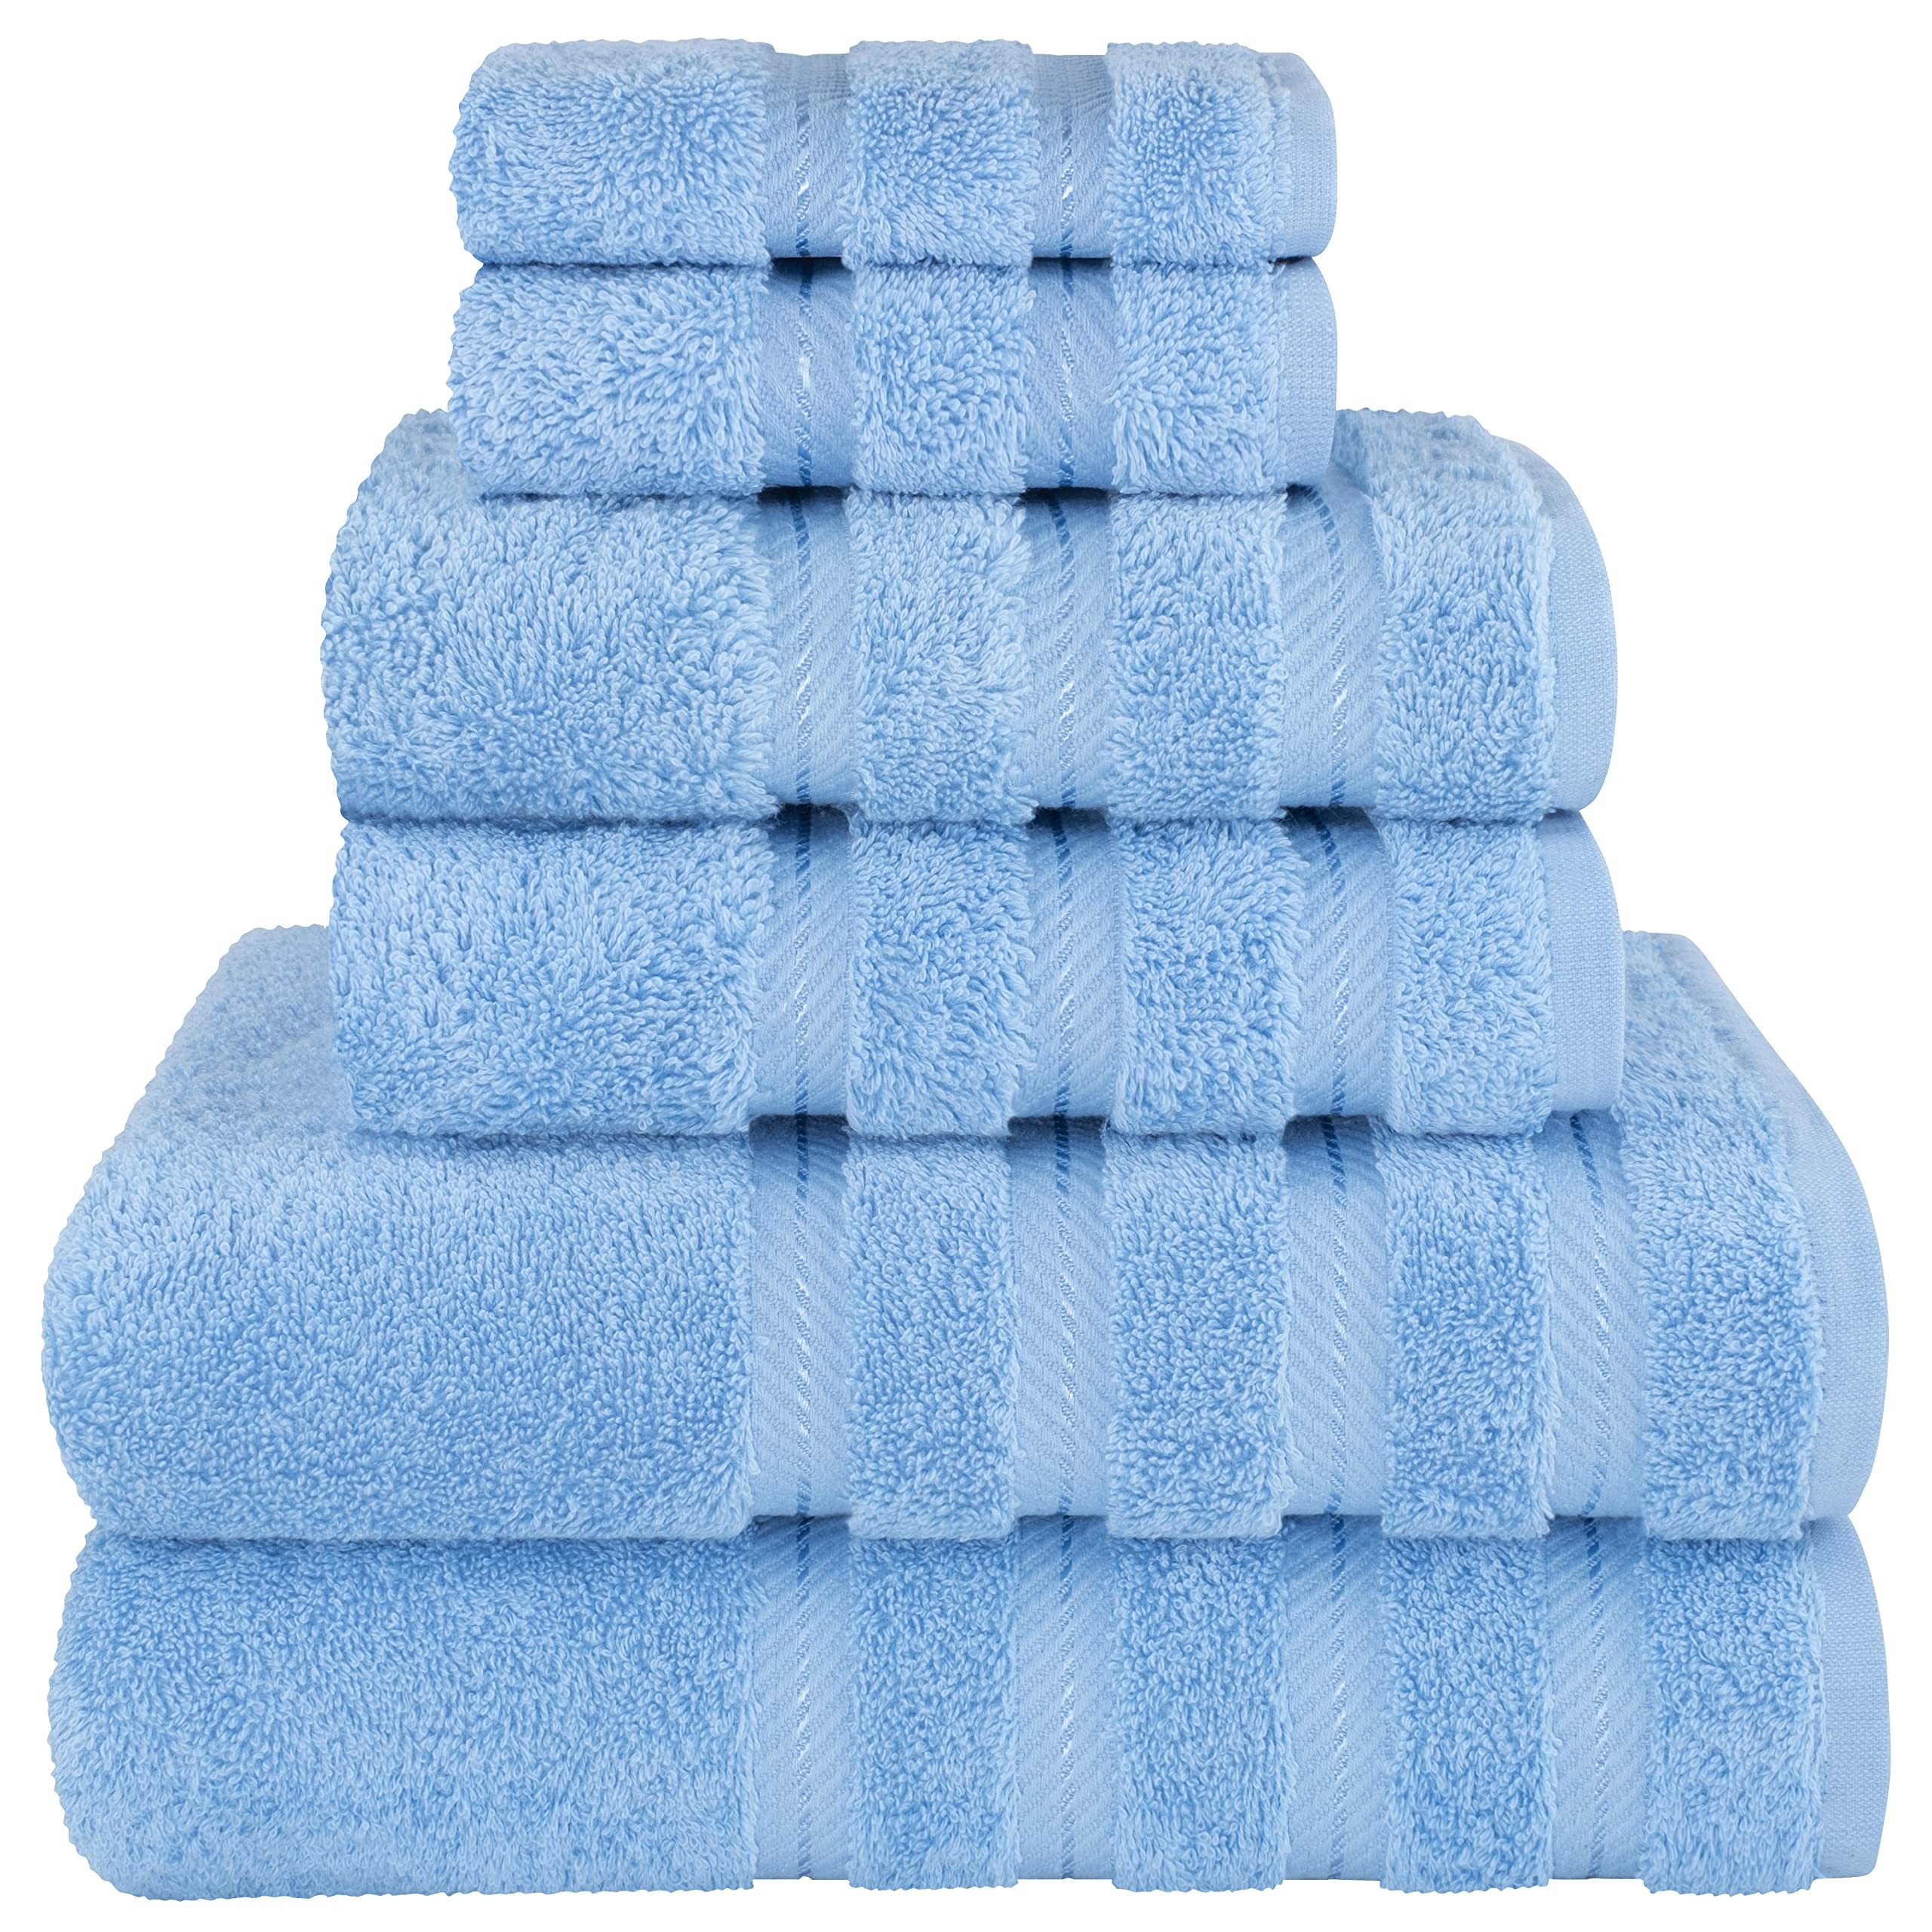 Smuge Extra Large Bath Towel Sets of 8, 2 Large Bath Towels Oversized, 2  Hand Towels, 4 Washcloths, Soft Microfiber, Quick Dry, Highly Absorbent Bath  Towels for Bathroom Kitchen Spa(White) 